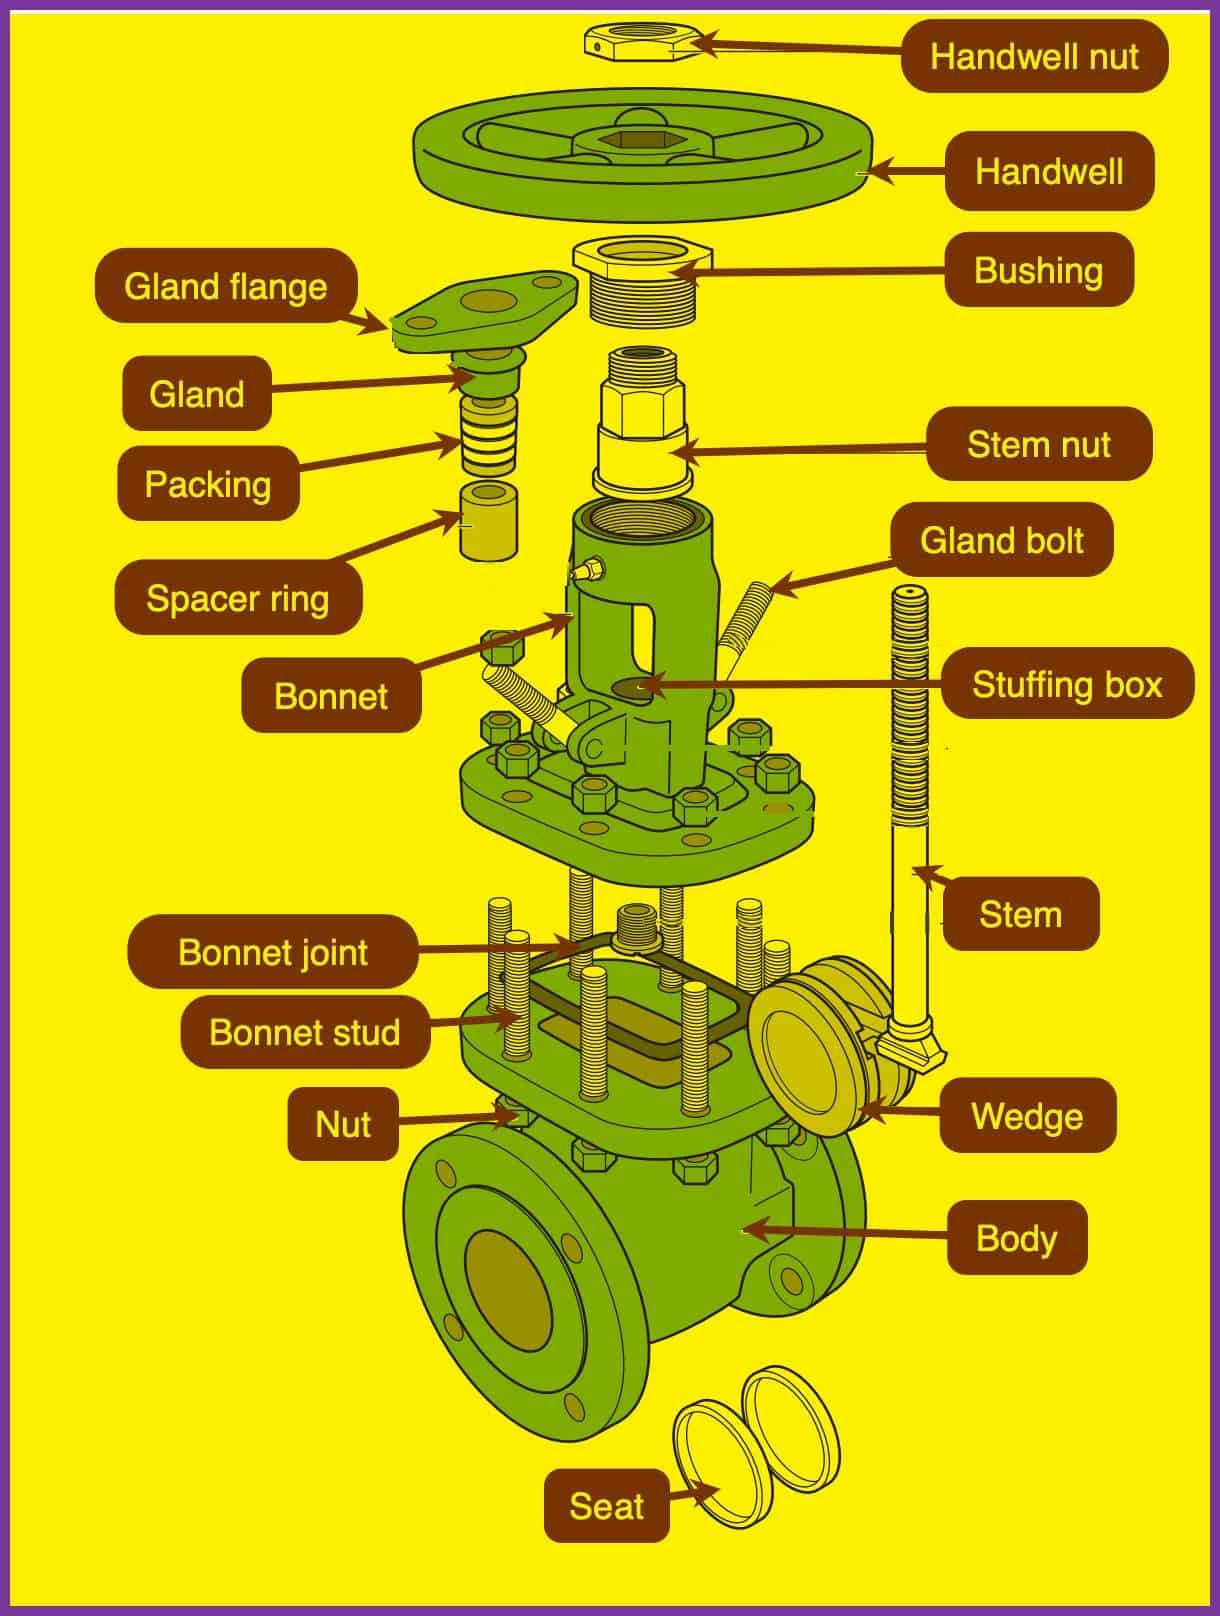 Calculate Man Hours - Gate Valve Types